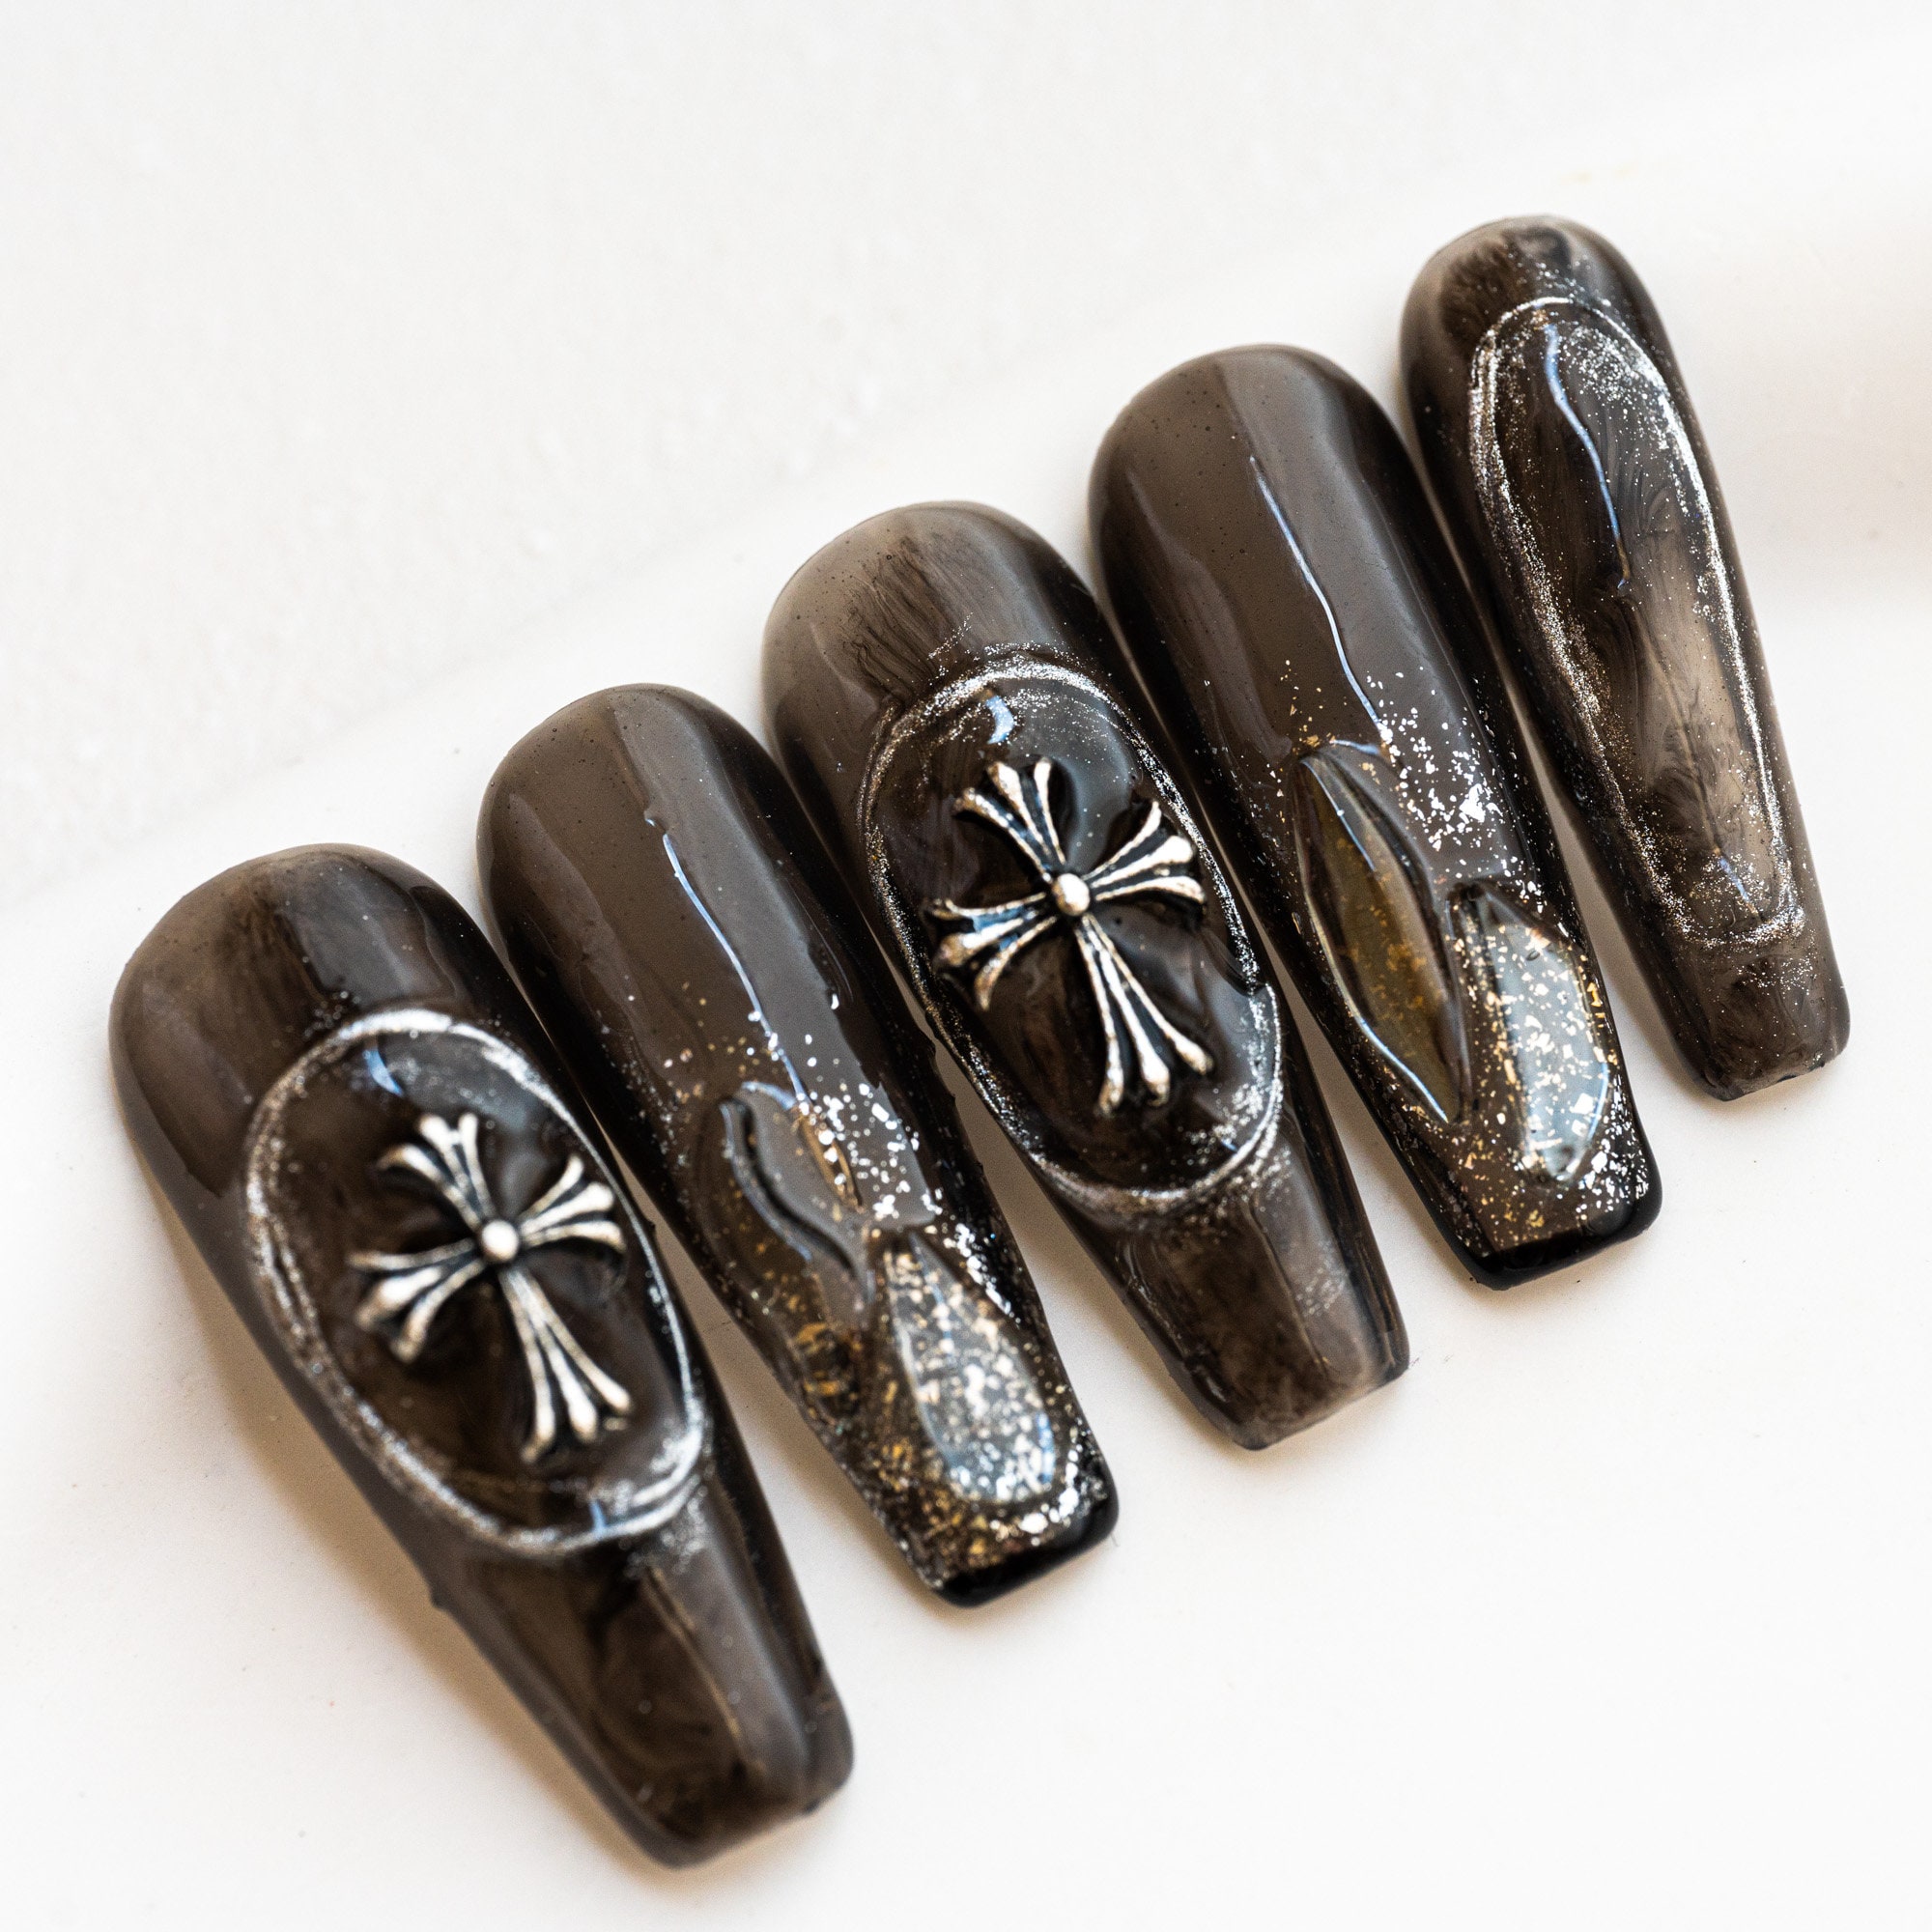 JUSTOTRY 24 Pcs Black Coffin Shape Press on Nails,Long Length with  Butterfly and Rhinestones Love Designs Ballet Fake False Nails with  Glue,Nail Art for Women and Girls Stick on Nails : Amazon.ca: